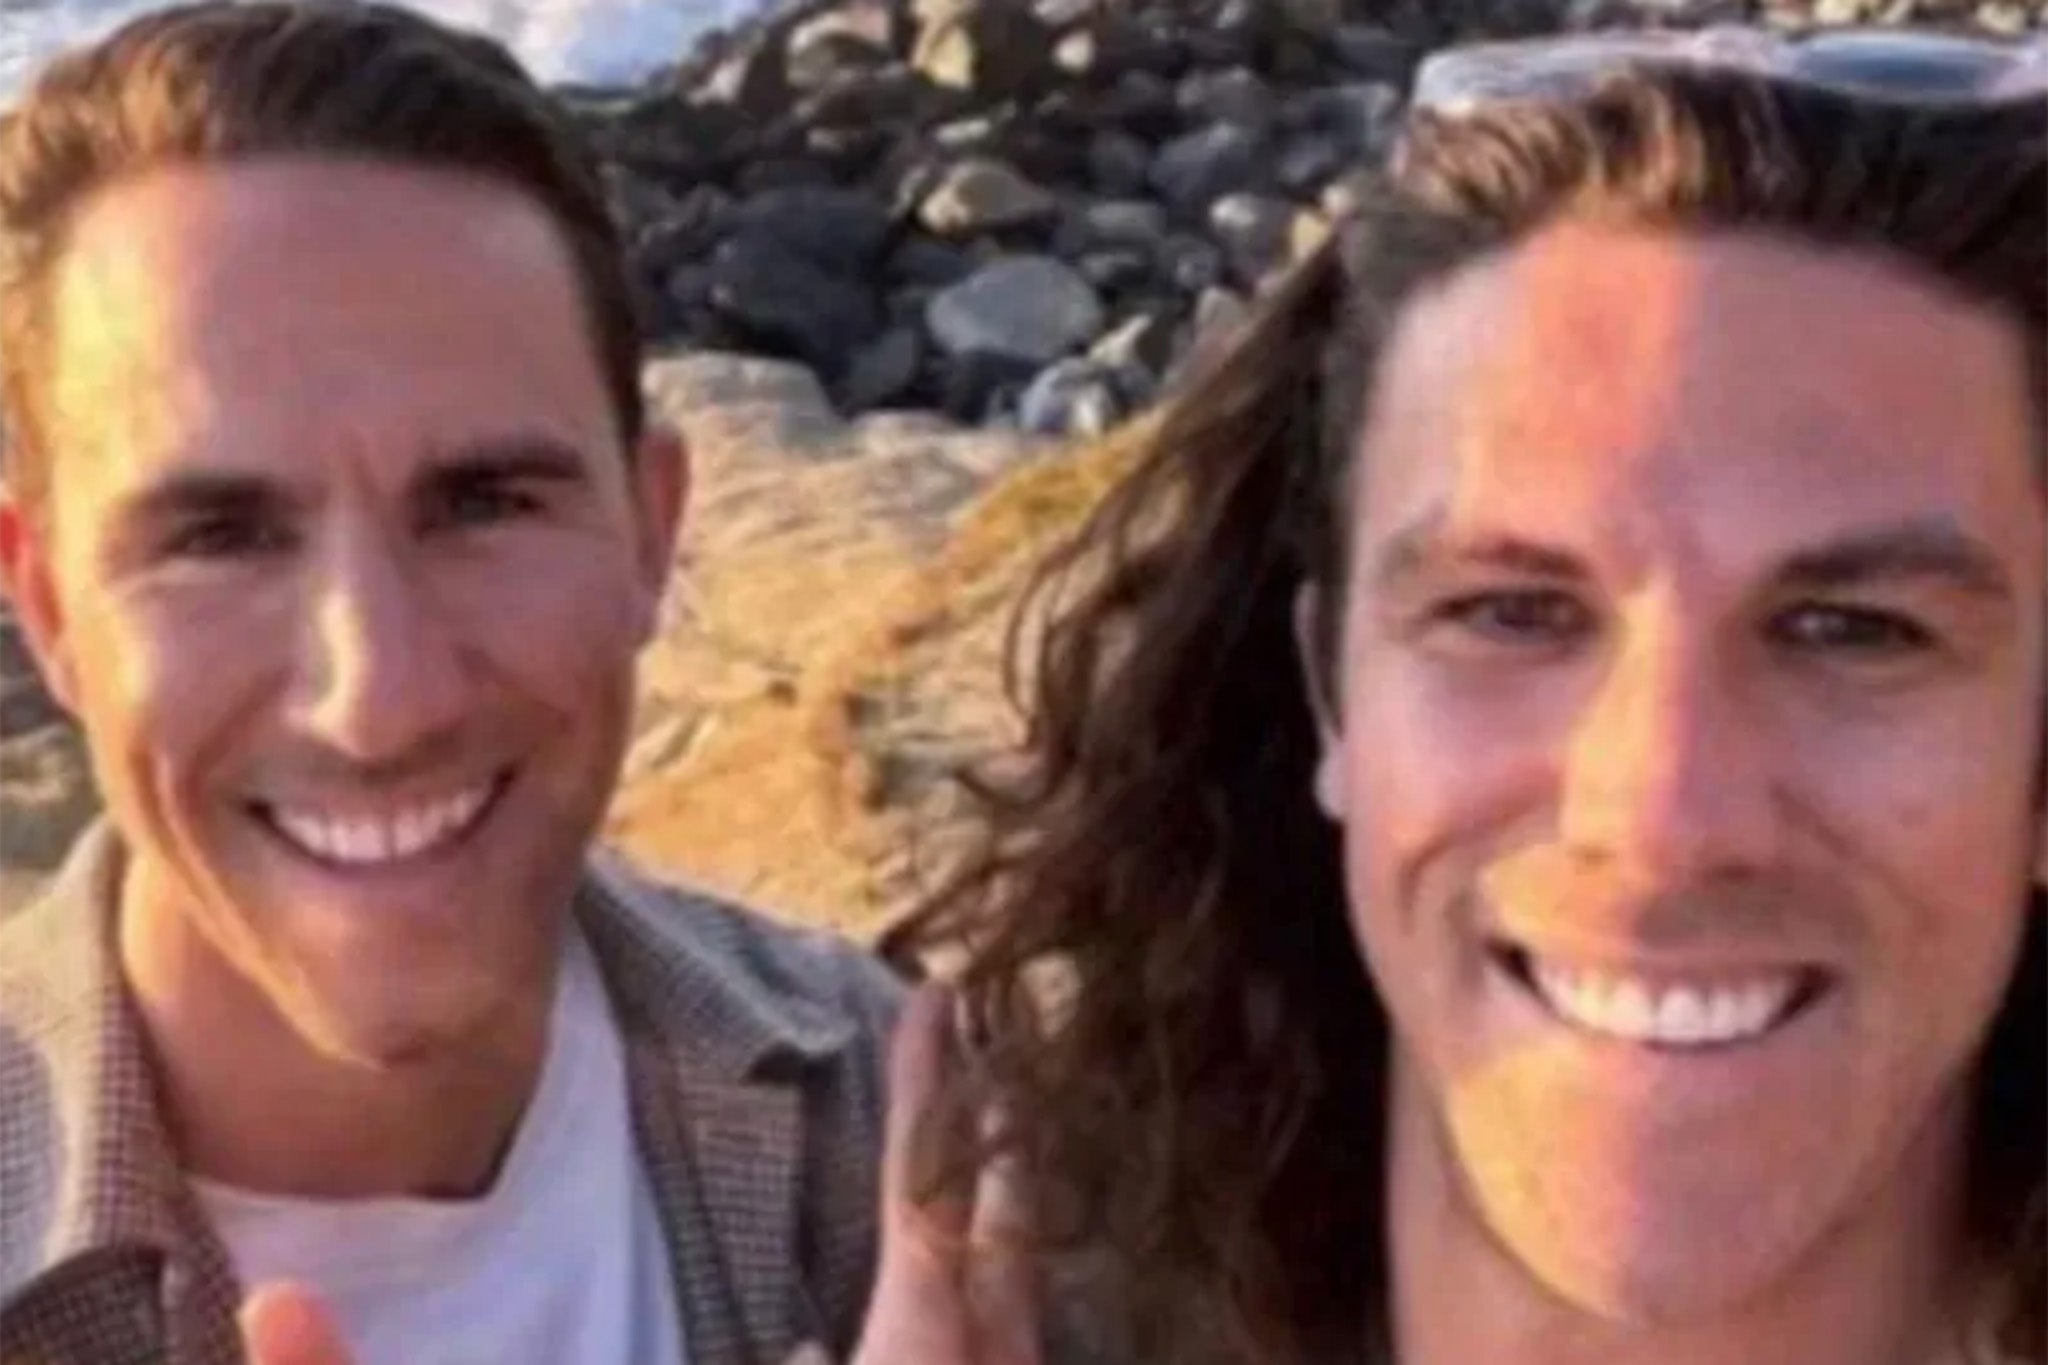 the american surfer killed in mexico was planning his wedding. now his family is planning his funeral